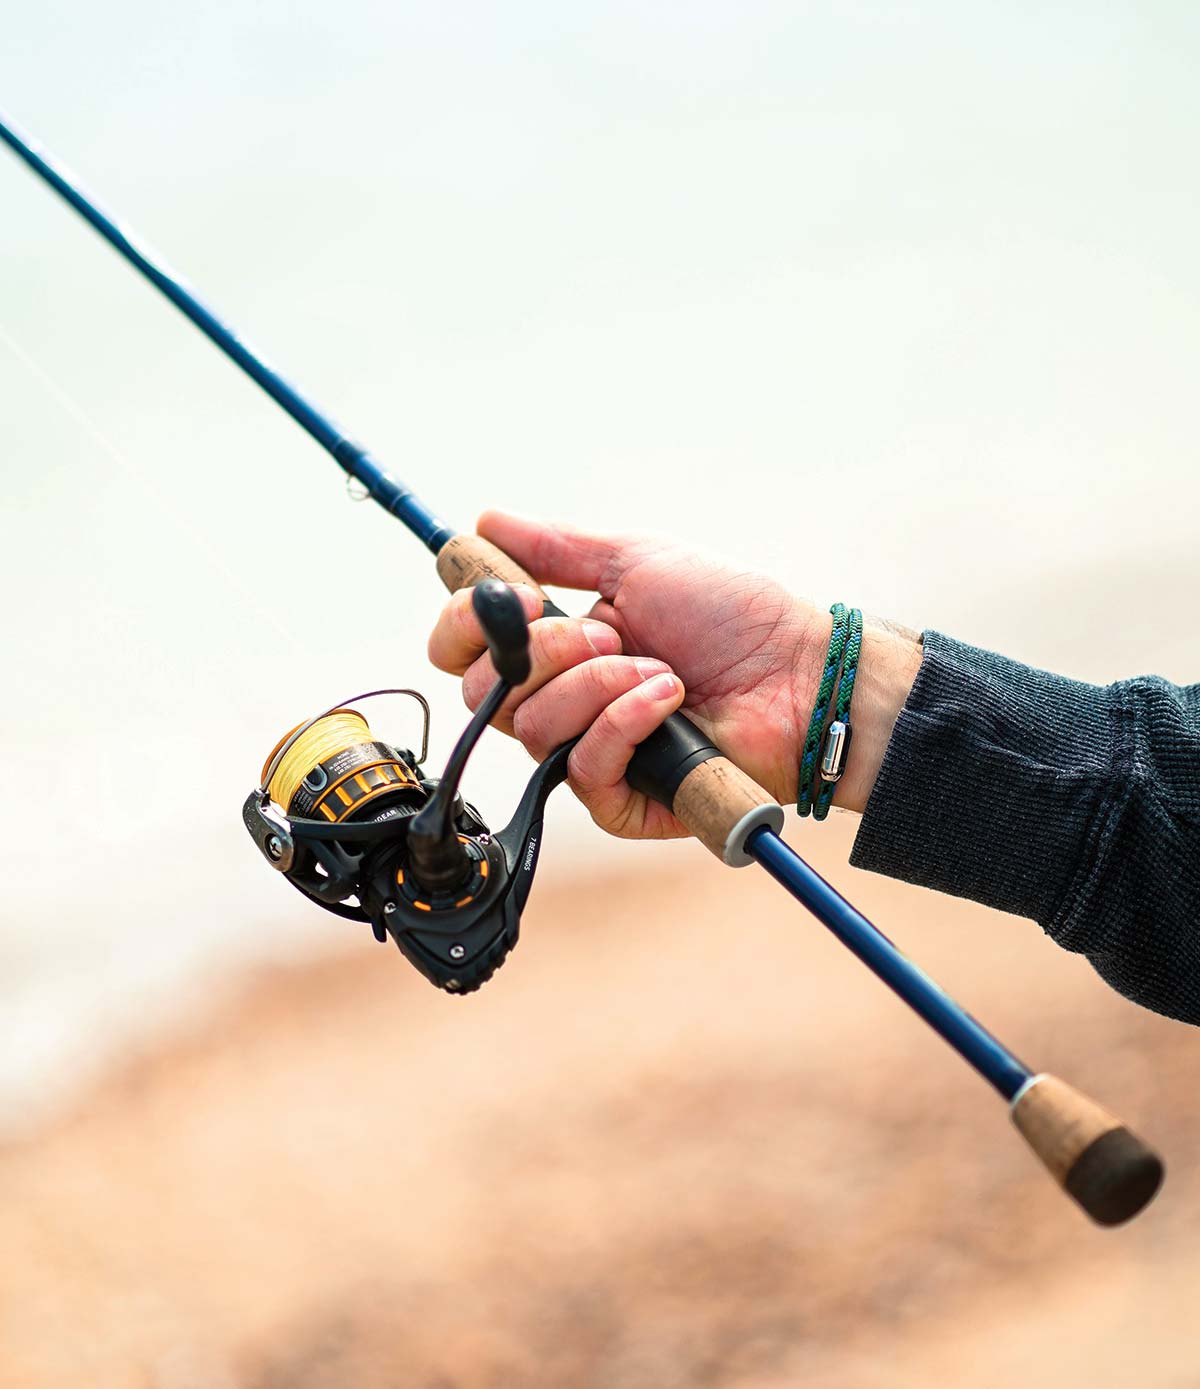 Snap It” On The Beach: How To Snap-Jigging From Shore - The Fisherman